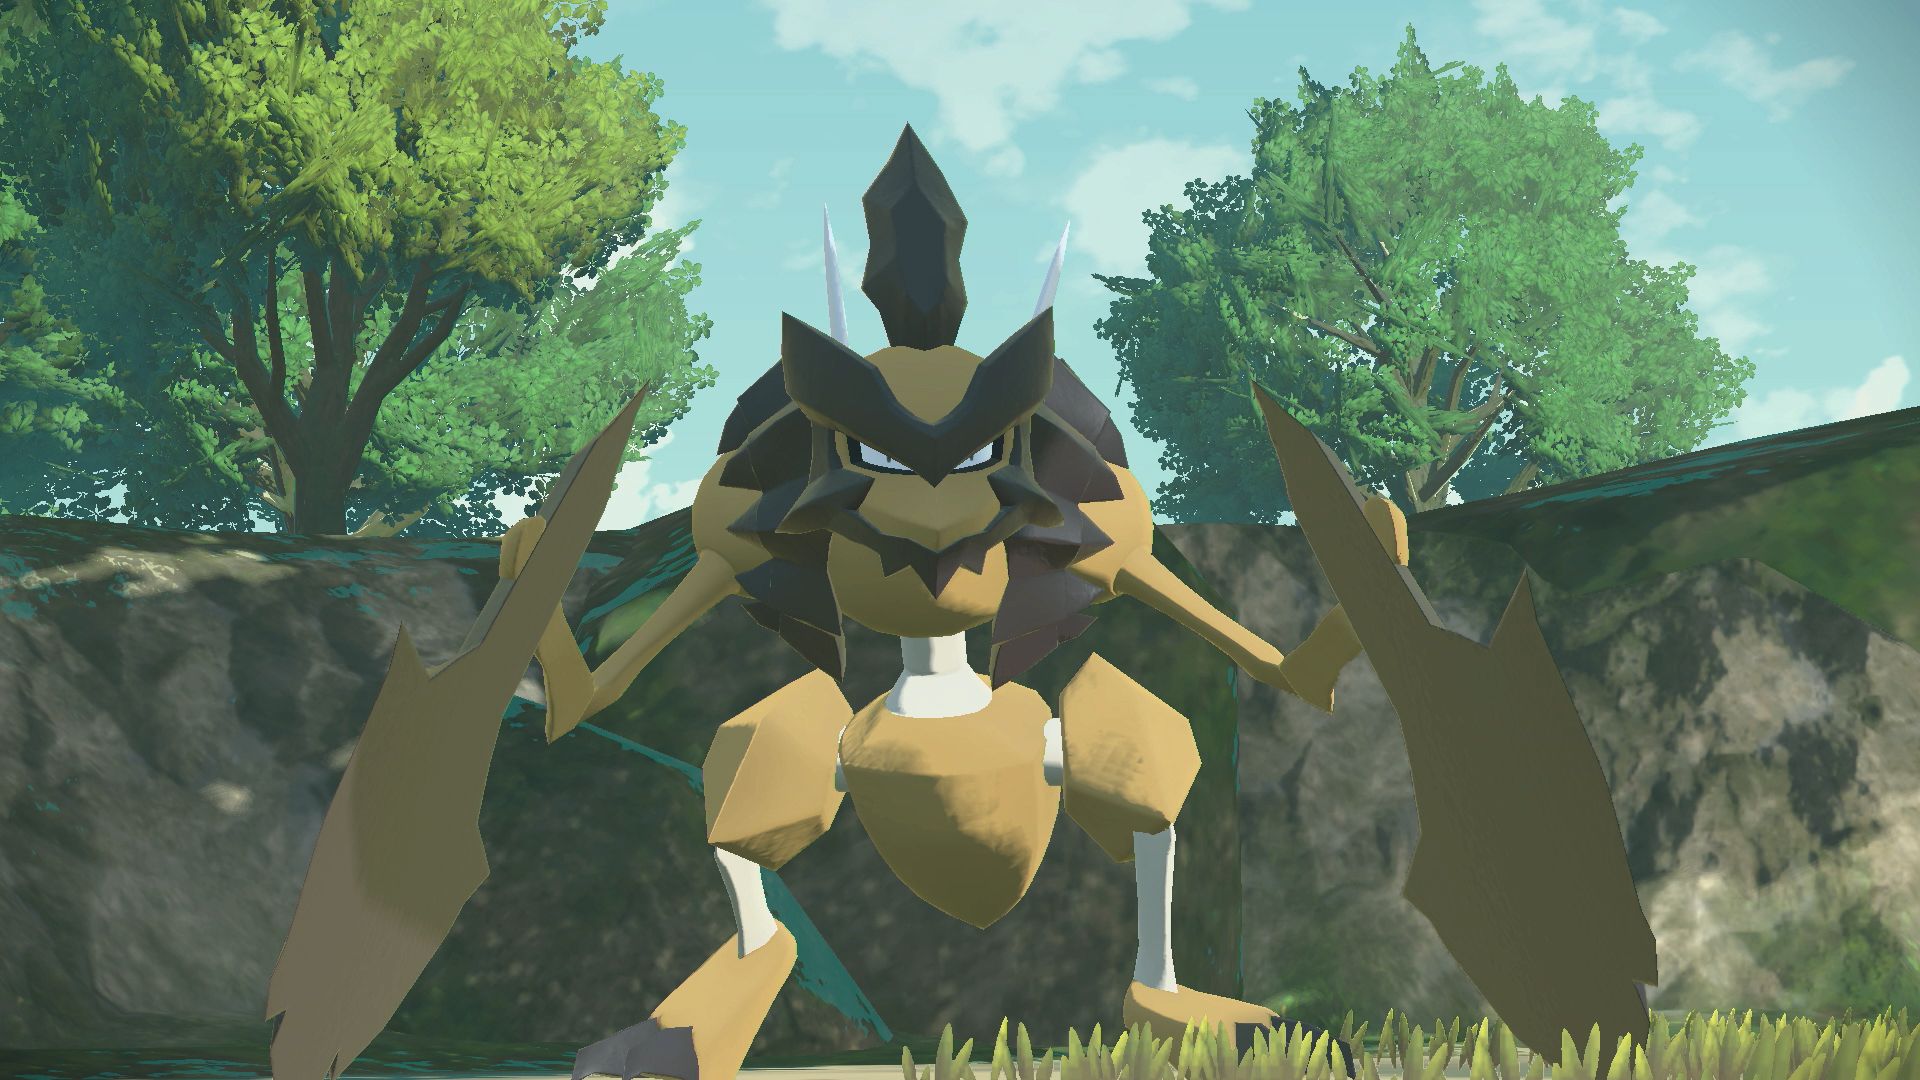 Pokémon Legends: Arceus': How Many Pokémon Are in the Game, and